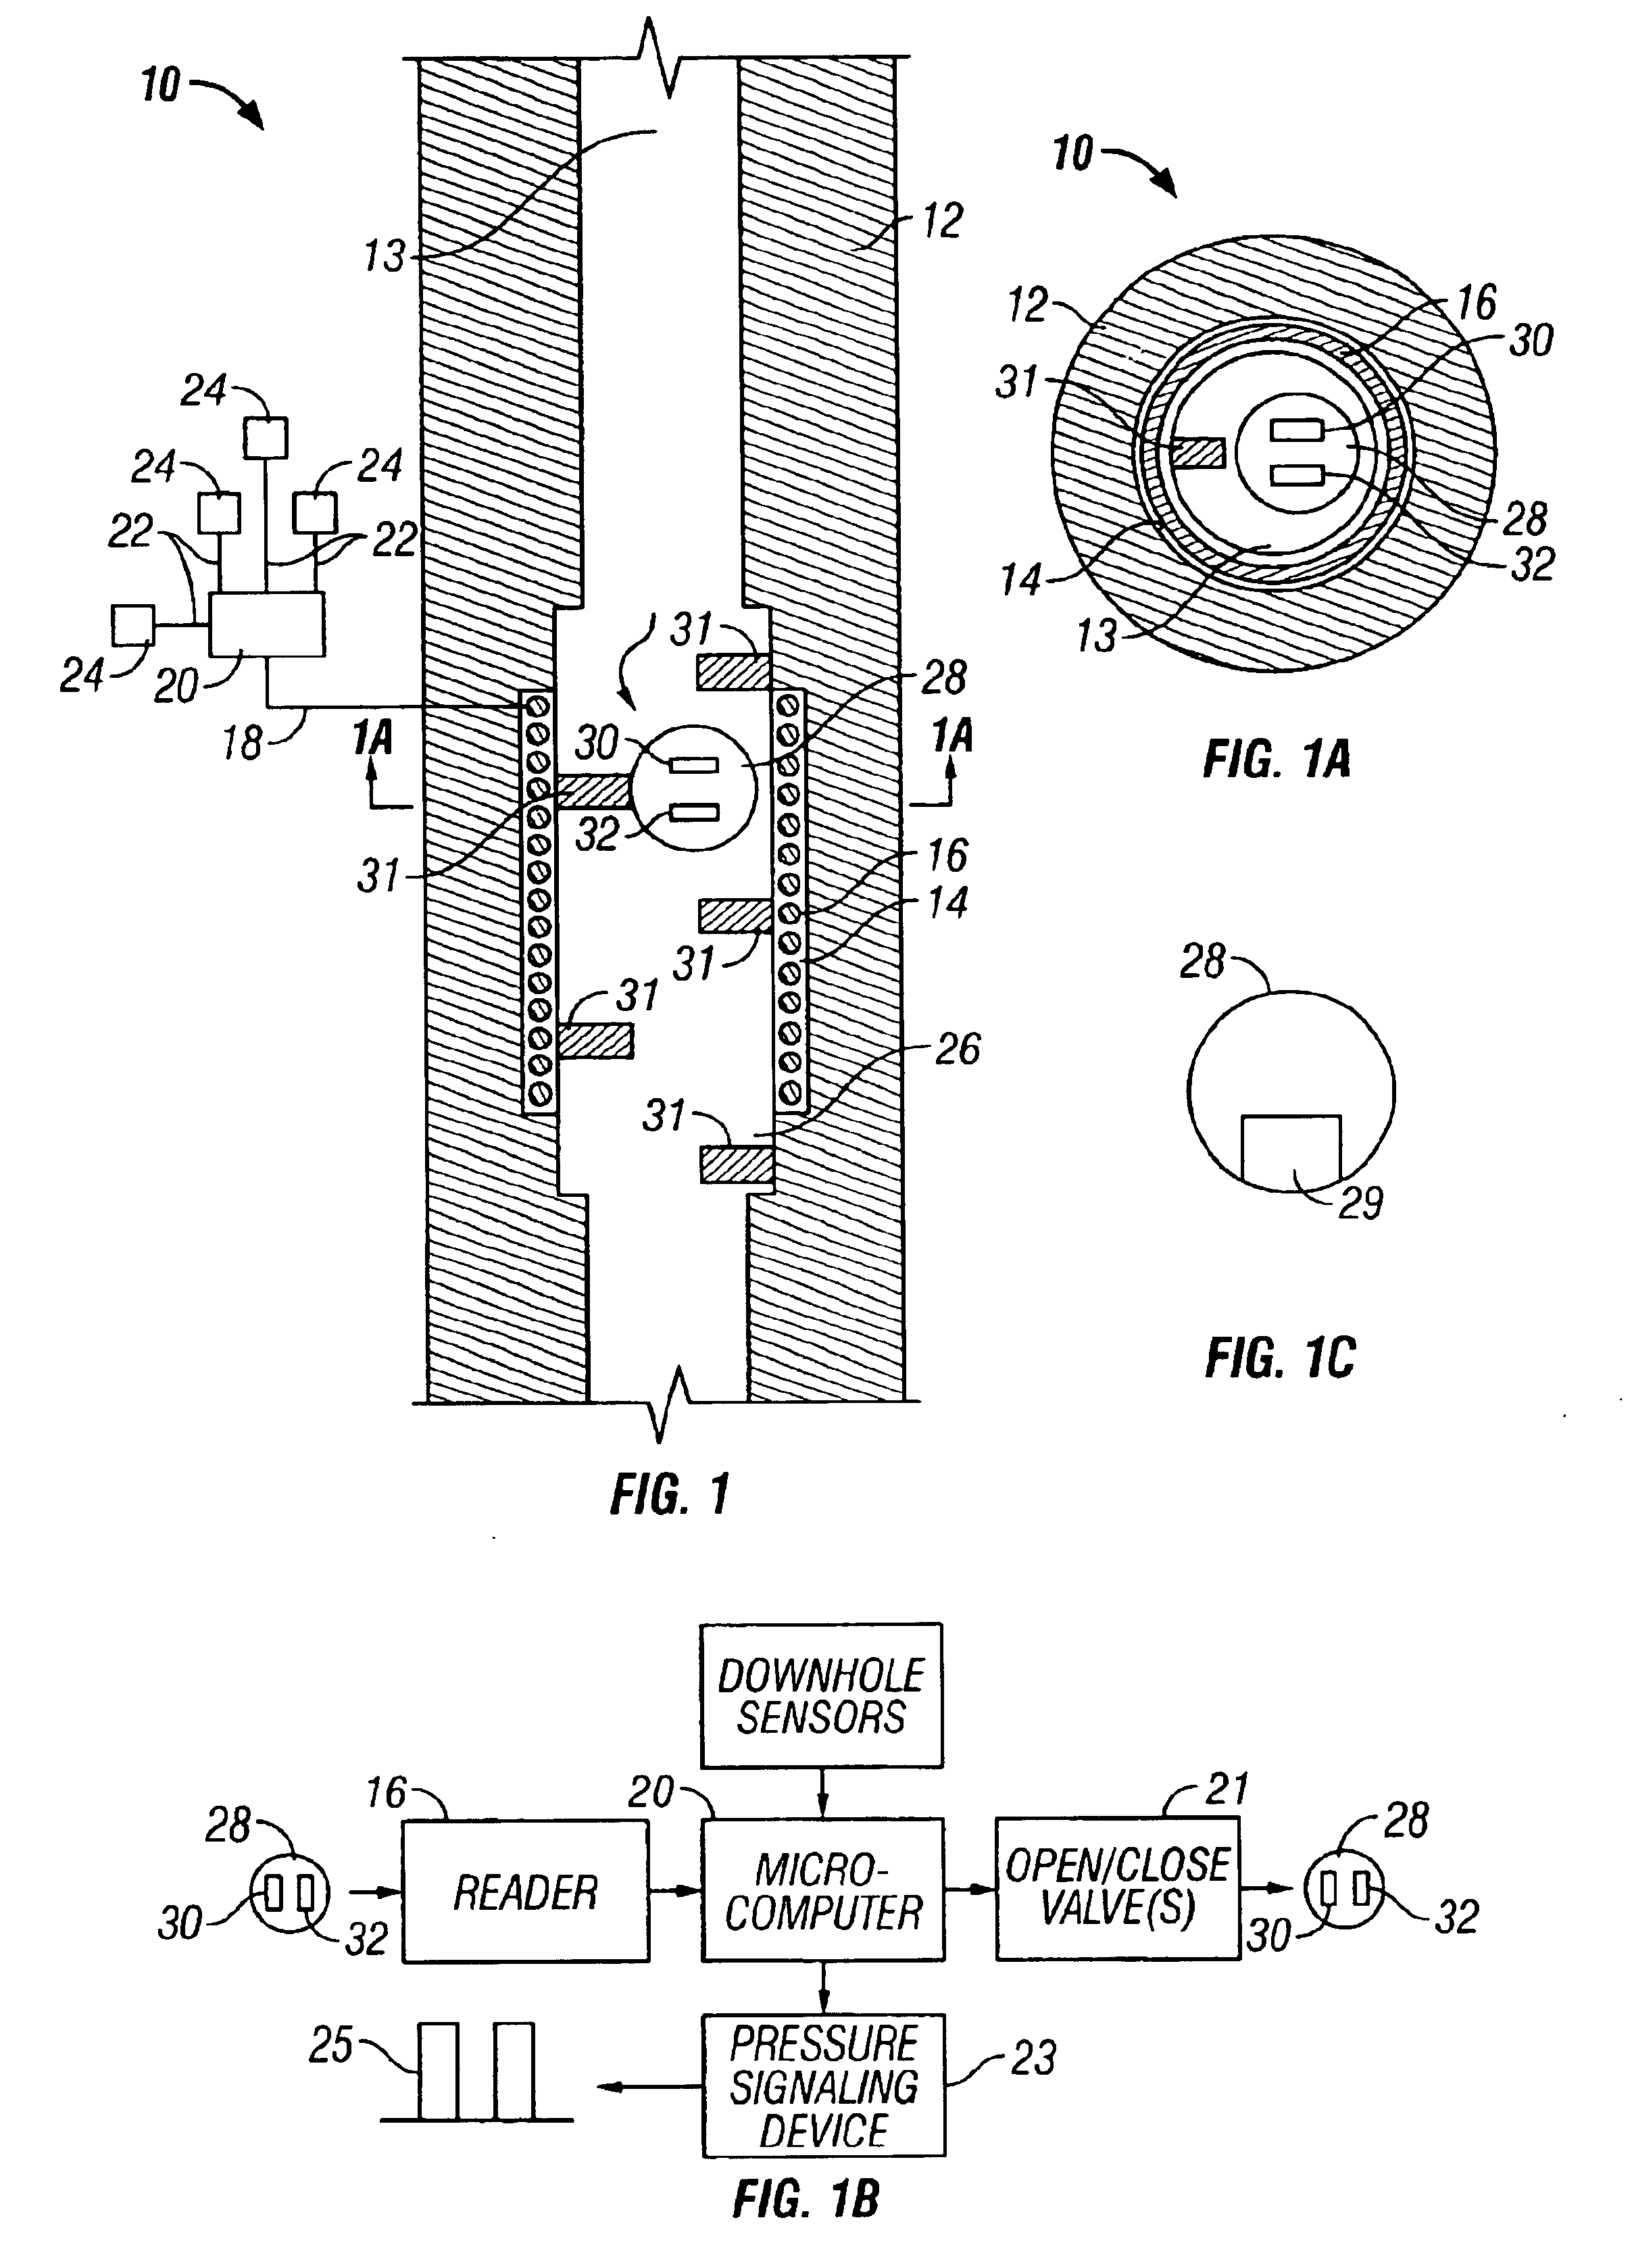 Universal downhole tool control apparatus and methods